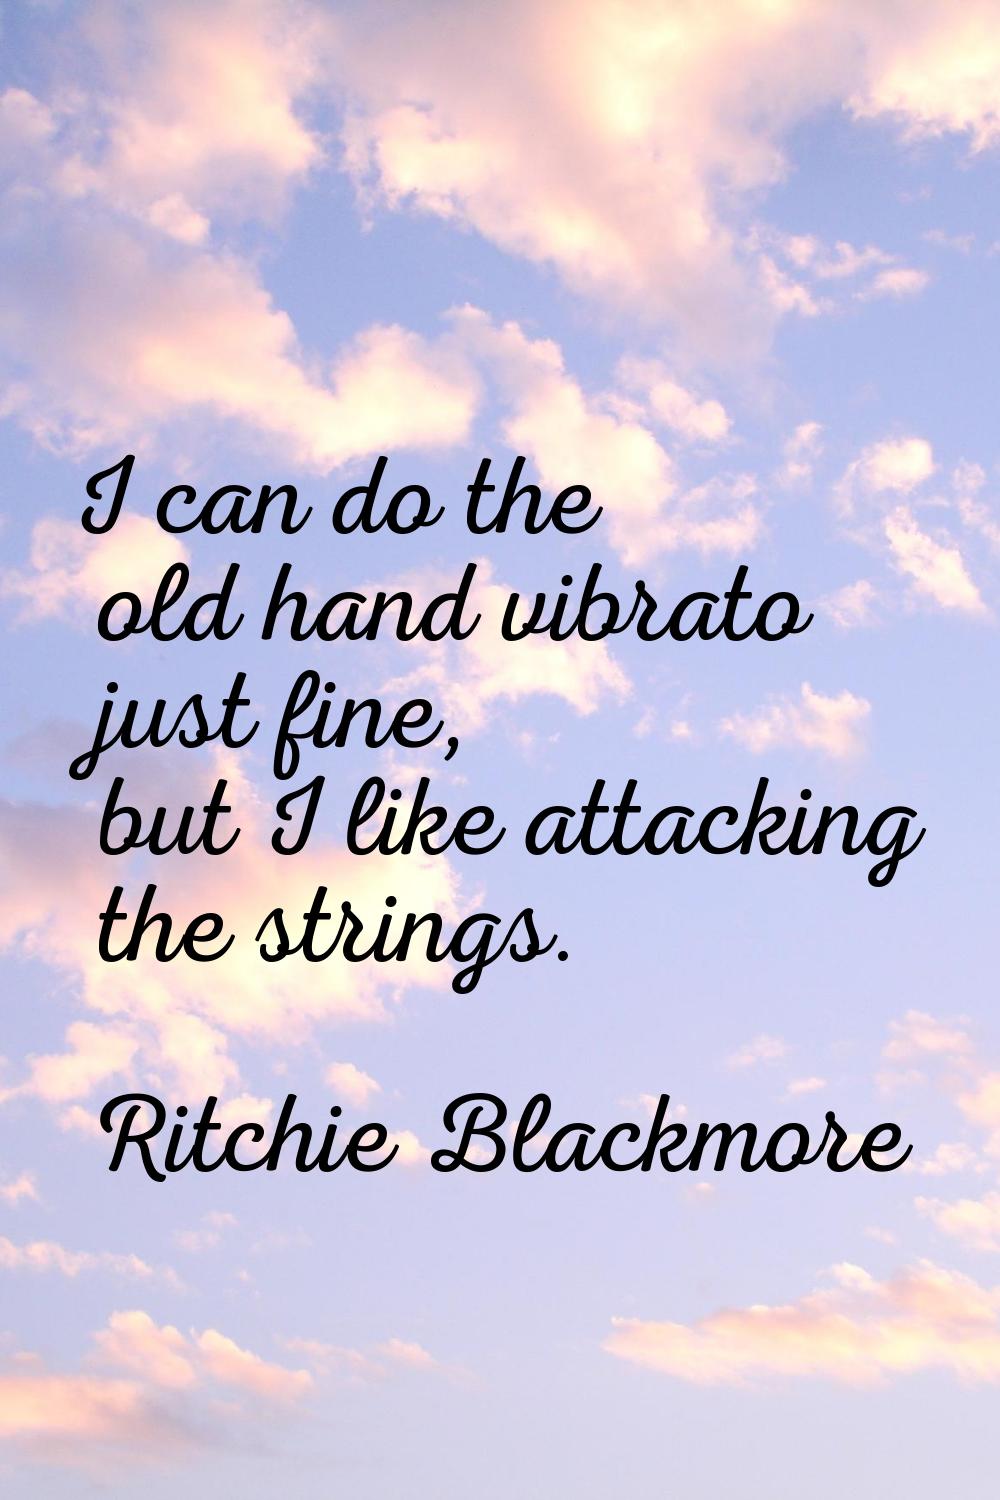 I can do the old hand vibrato just fine, but I like attacking the strings.